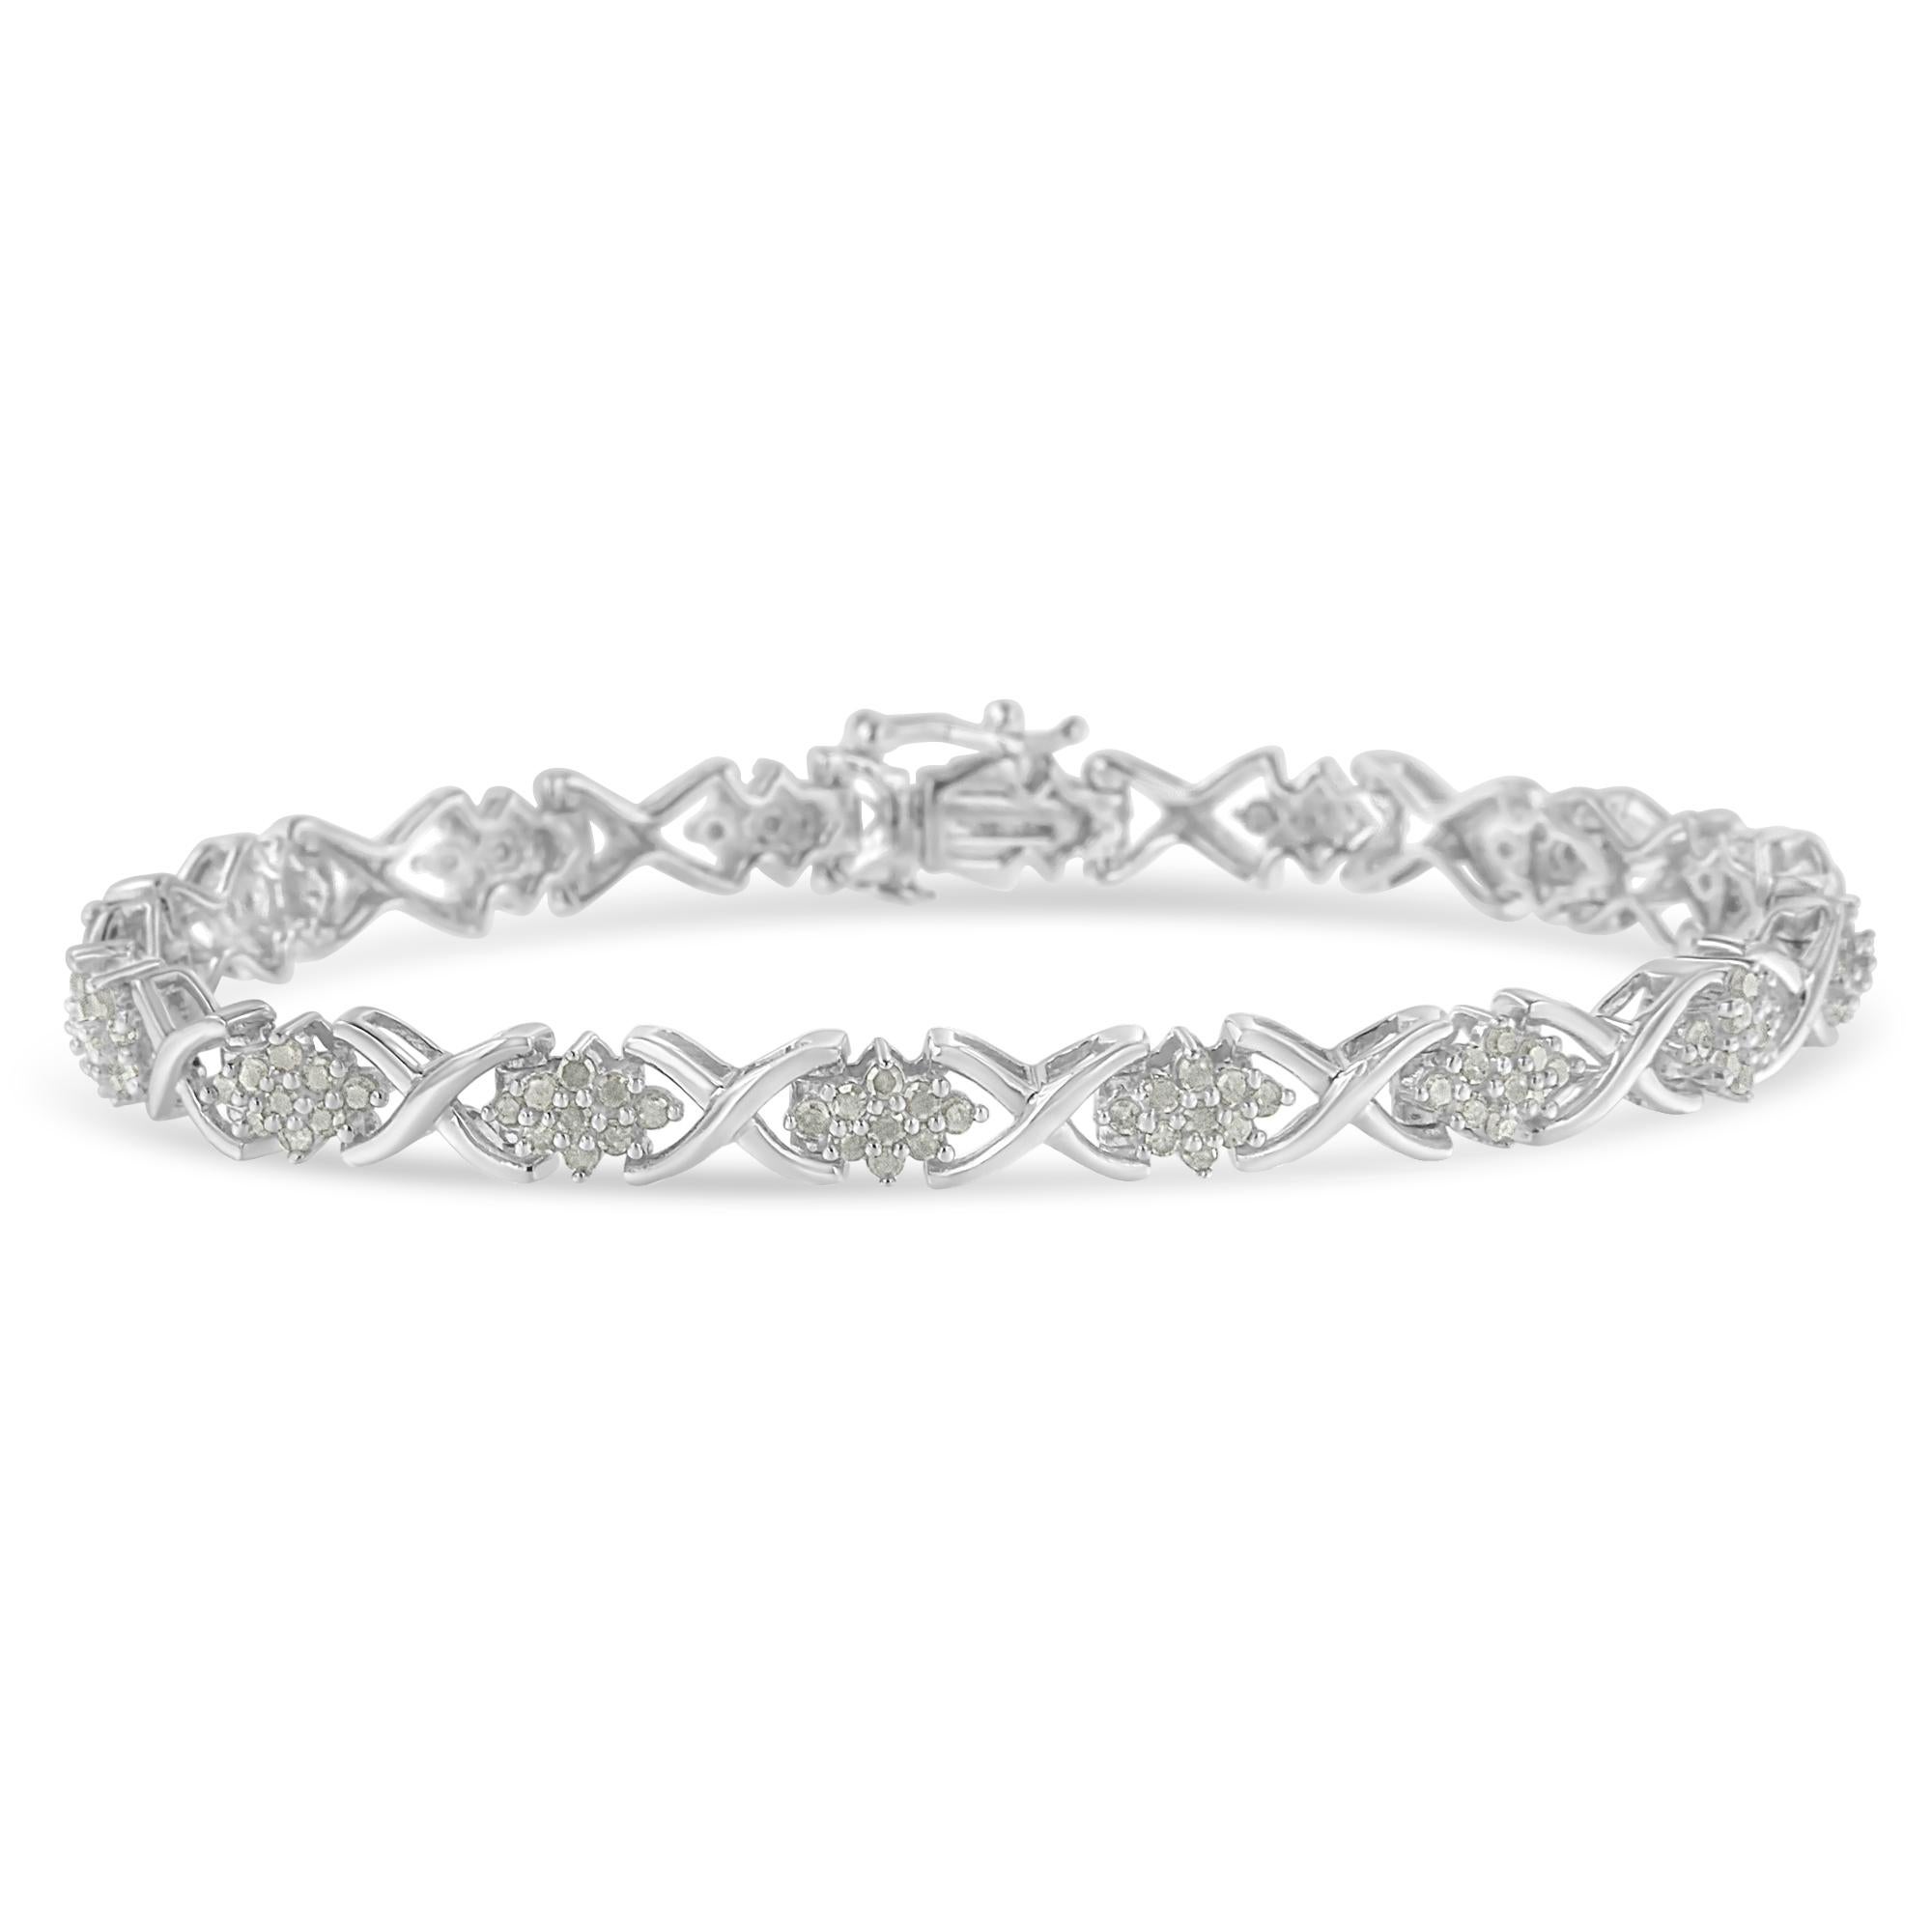 This stunning link bracelet is sure to add a bit of glamour to your everyday outfit. Made with the finest .925 sterling silver, this piece is created with 144 round cut diamonds embellished in a prong setting. Each cluster of rose-cut diamonds in